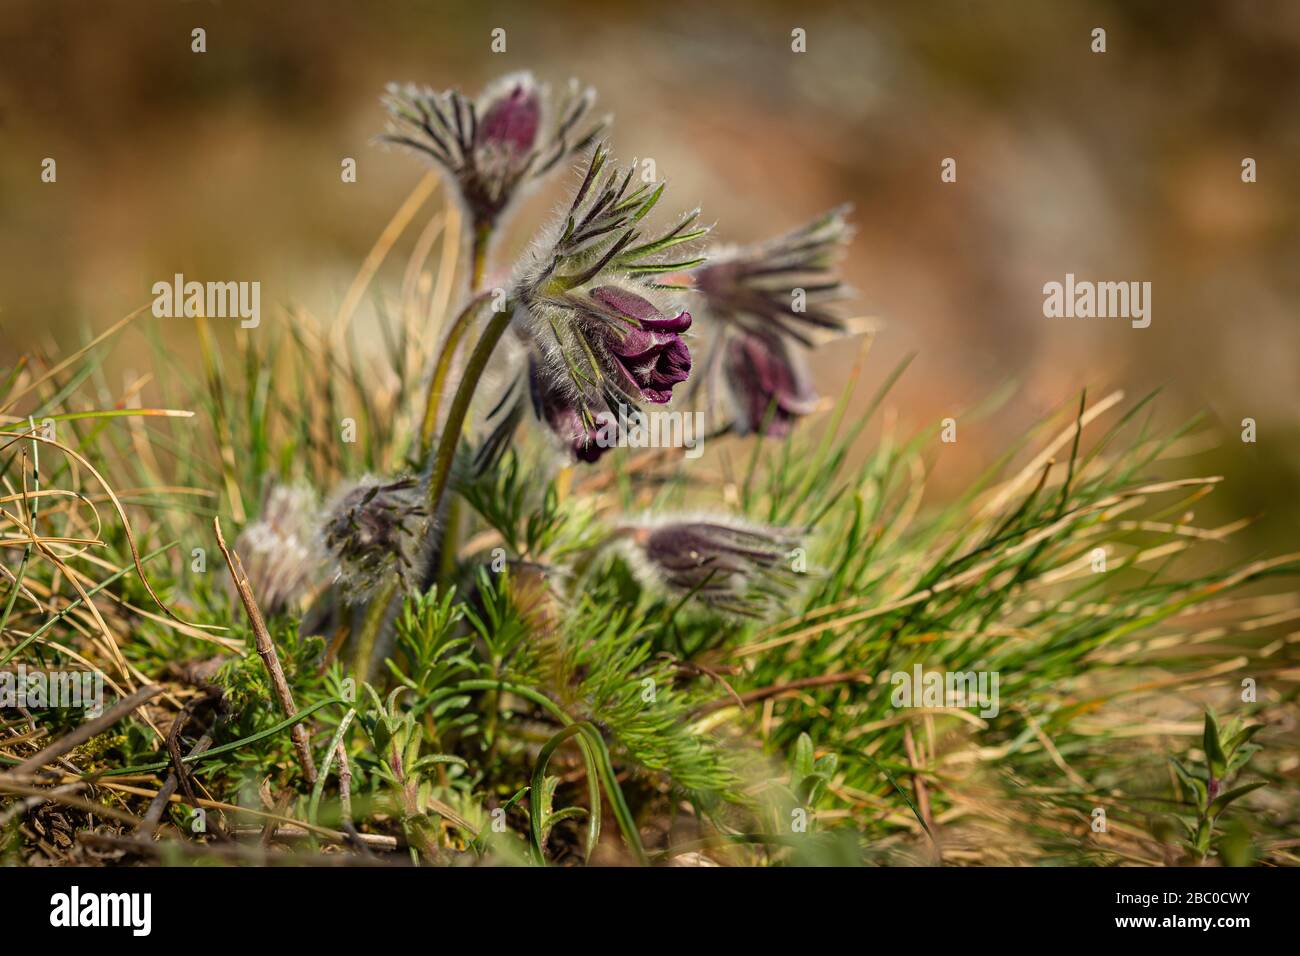 Clump of beautiful wind flowers, meadow anemone, pasque flowers with dark purple cup like flower and hairy stalk growing in meadow on a spring day. Stock Photo